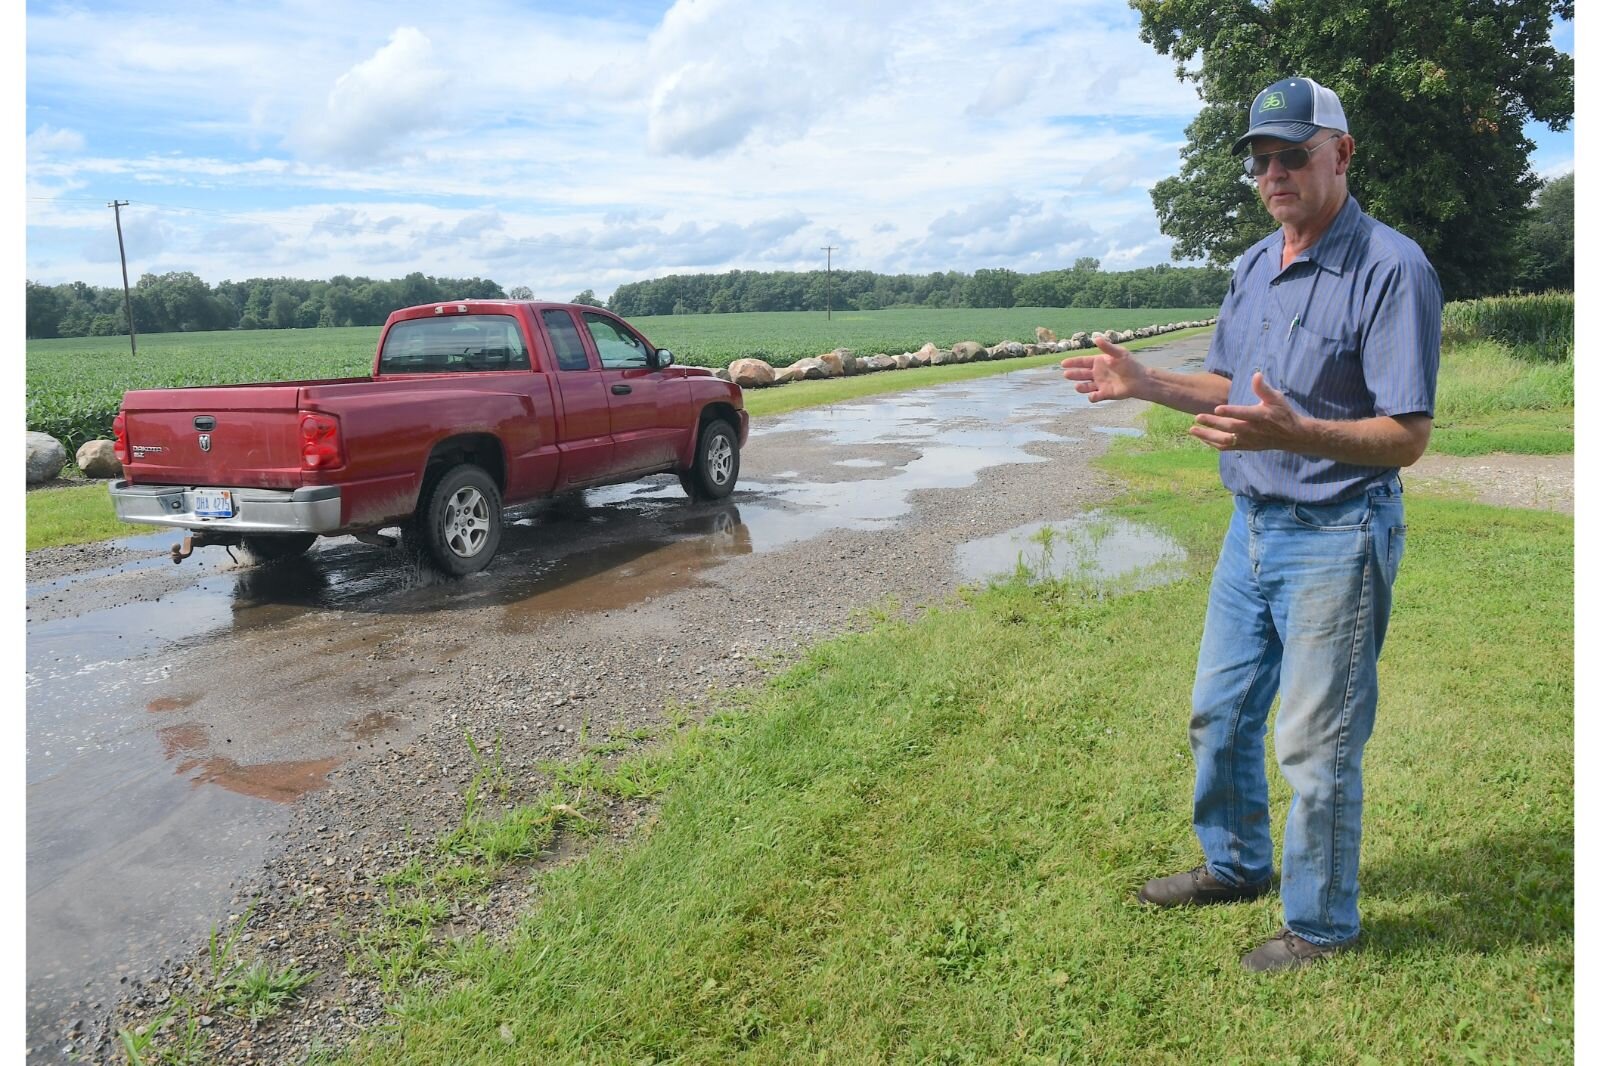 Fred Heaton stands along 24 Mile Road in Clarendon Township and talks about the poor quality of the roads in this part of Calhoun County.